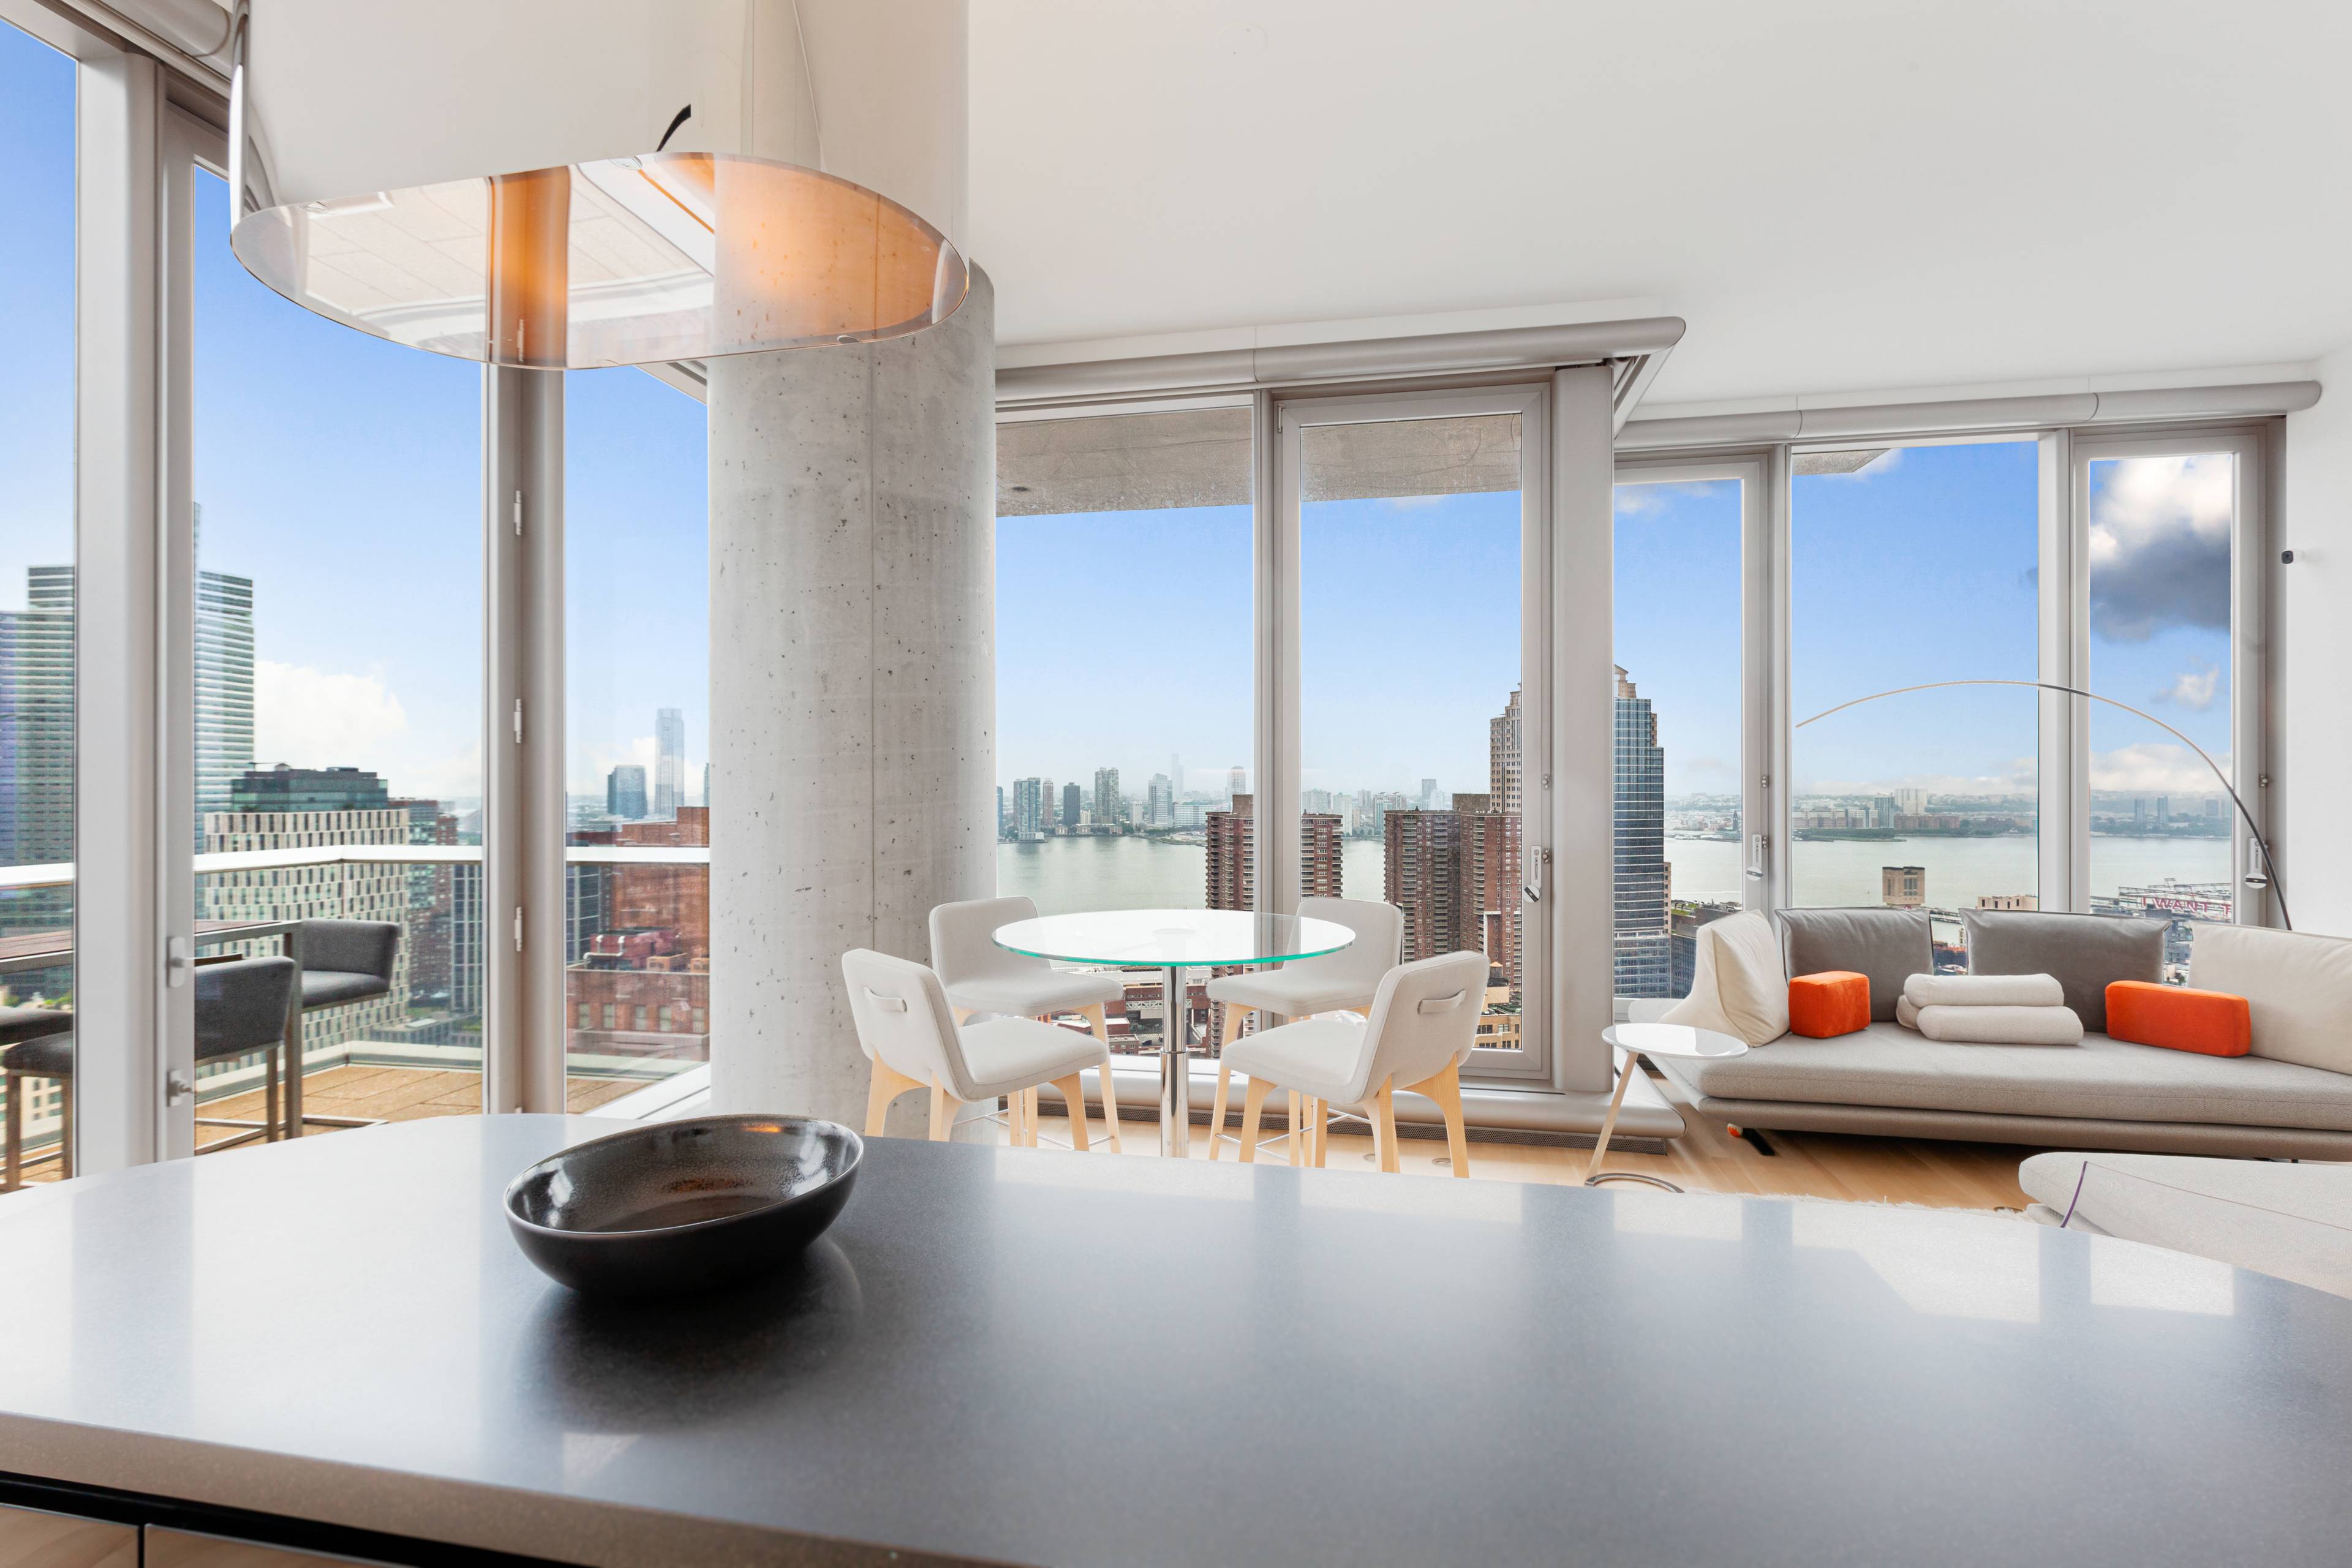 New Price Tribeca Furnished Ultra-Lux  Sprawling 2 Bedroom/ 2.5 bths with Spectacular Skyline & River Views with a Large Terrace